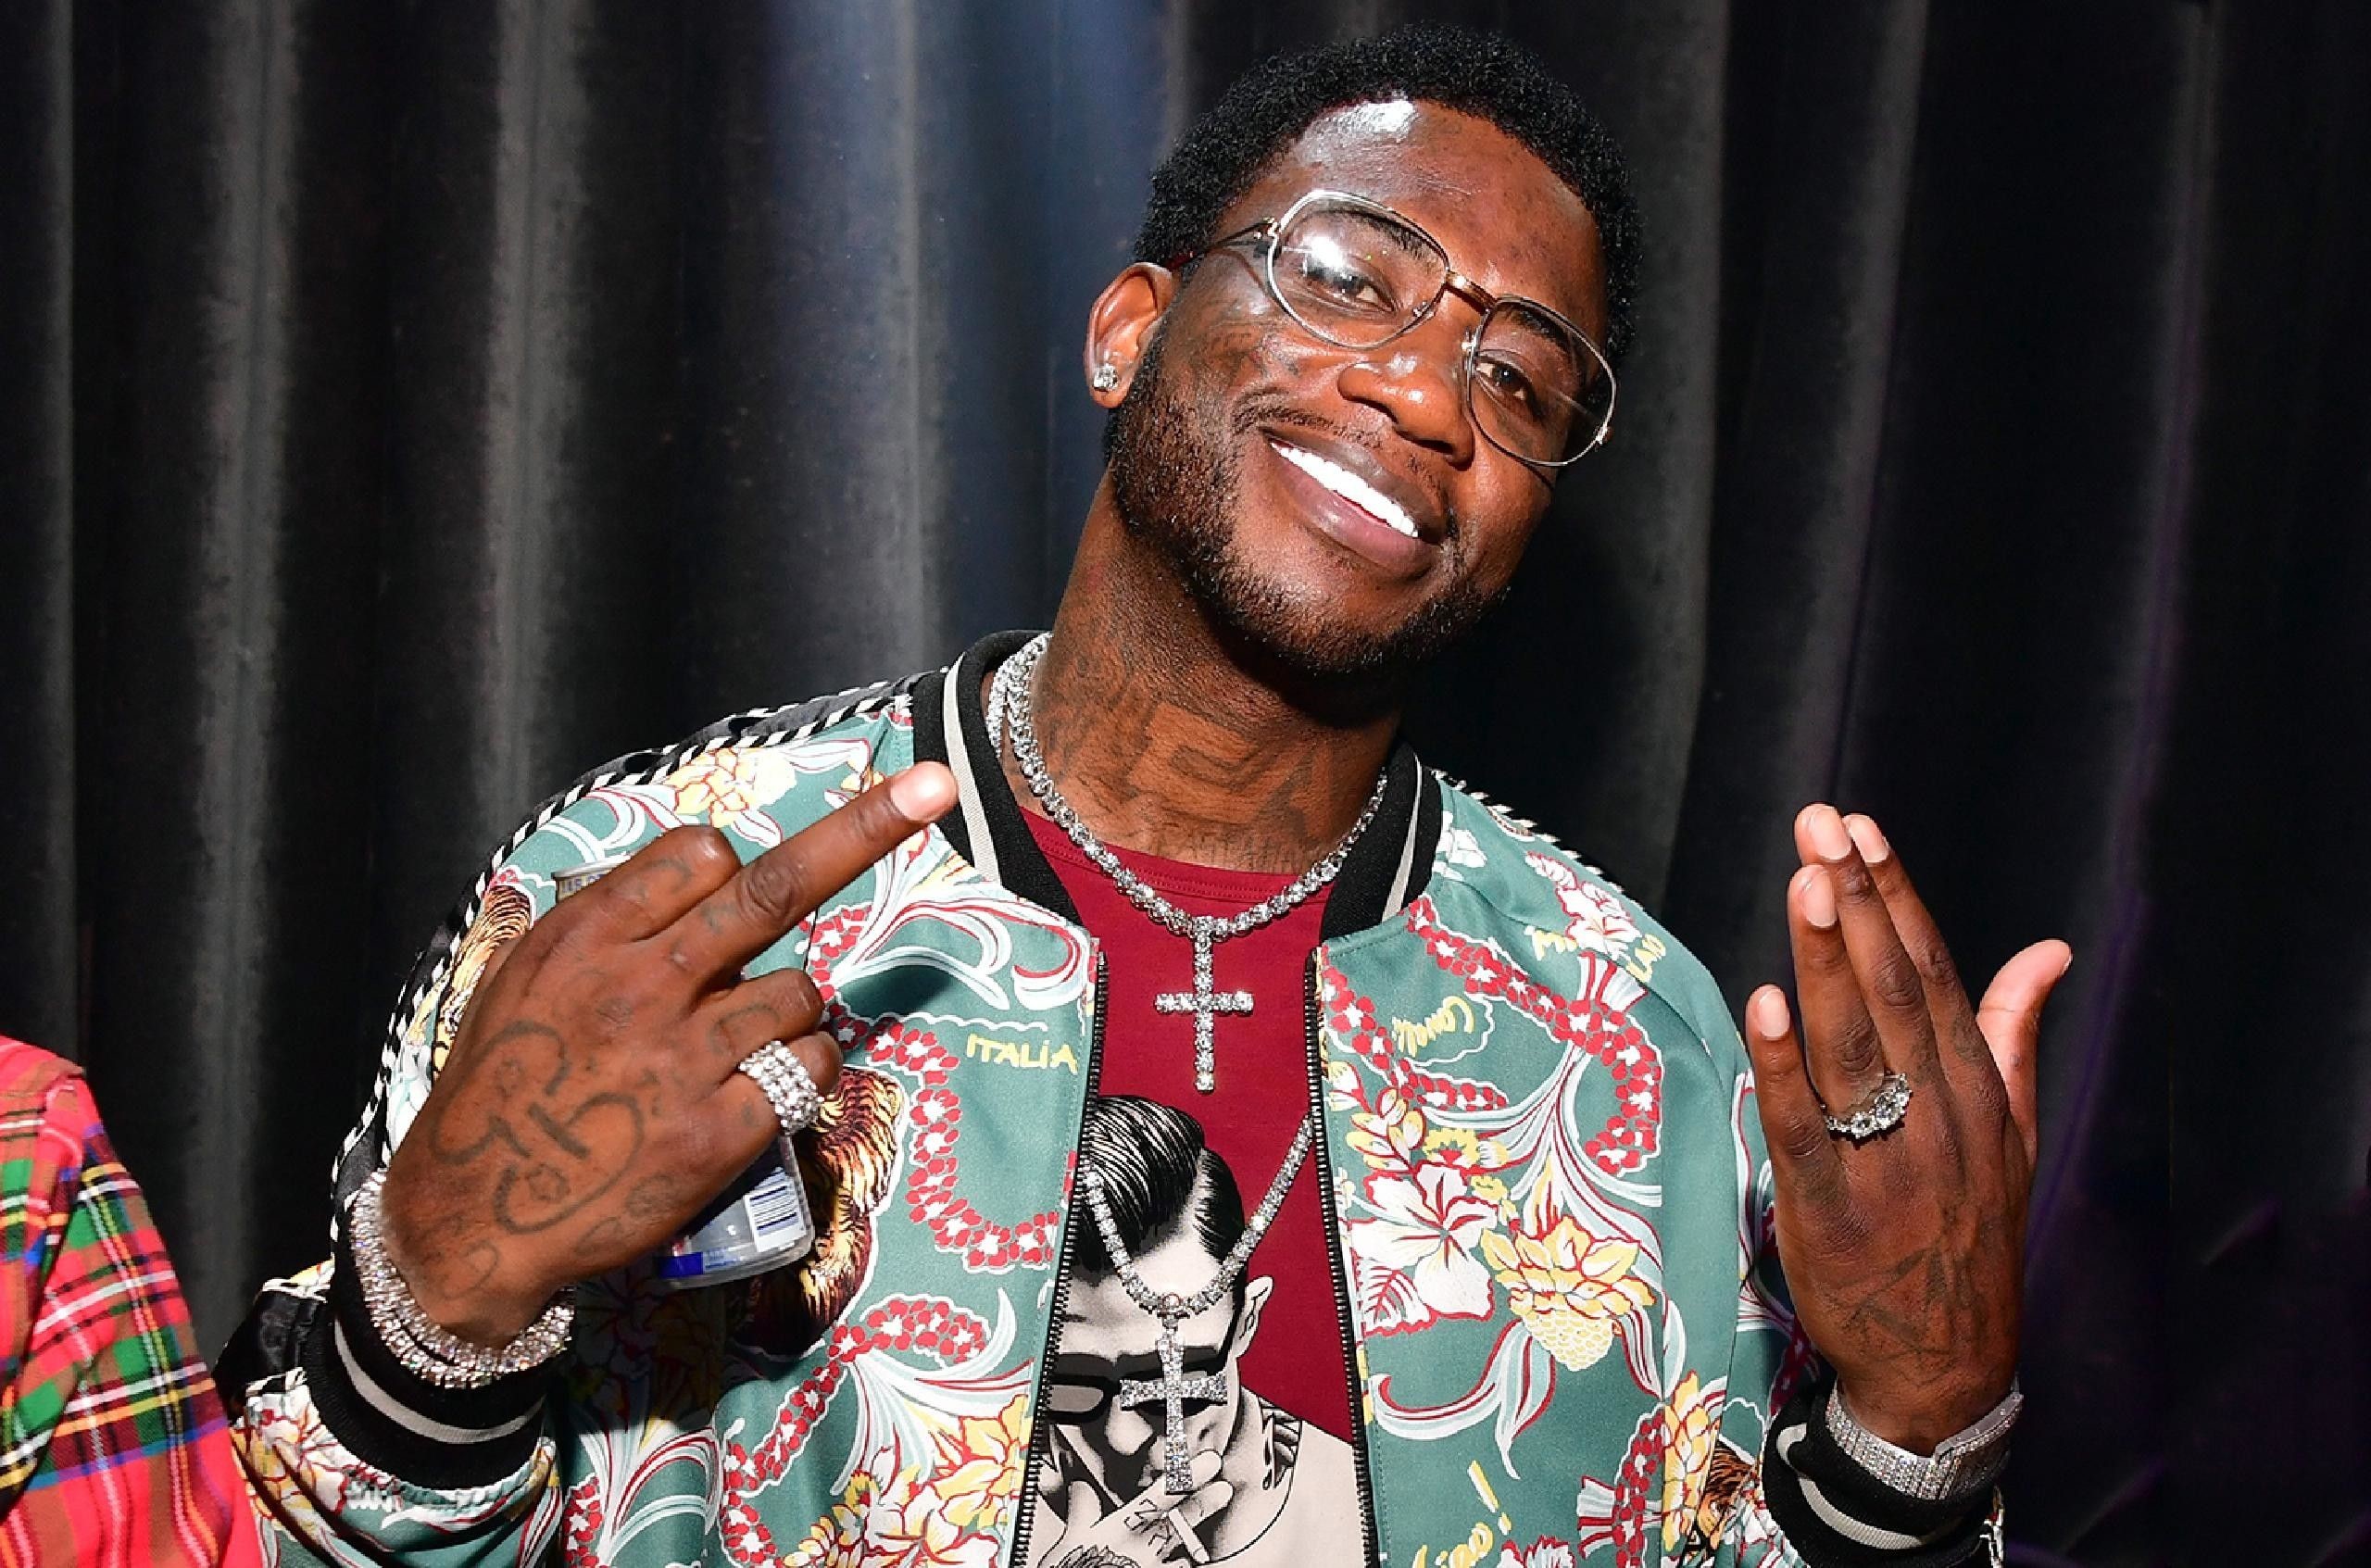 2560x1693 3600x2654 Gucci Mane Wallpapers Images Photos Pictures Backgrounds.  3600x2654 Gucci Mane Wallpapers Images Photos Pictures ...